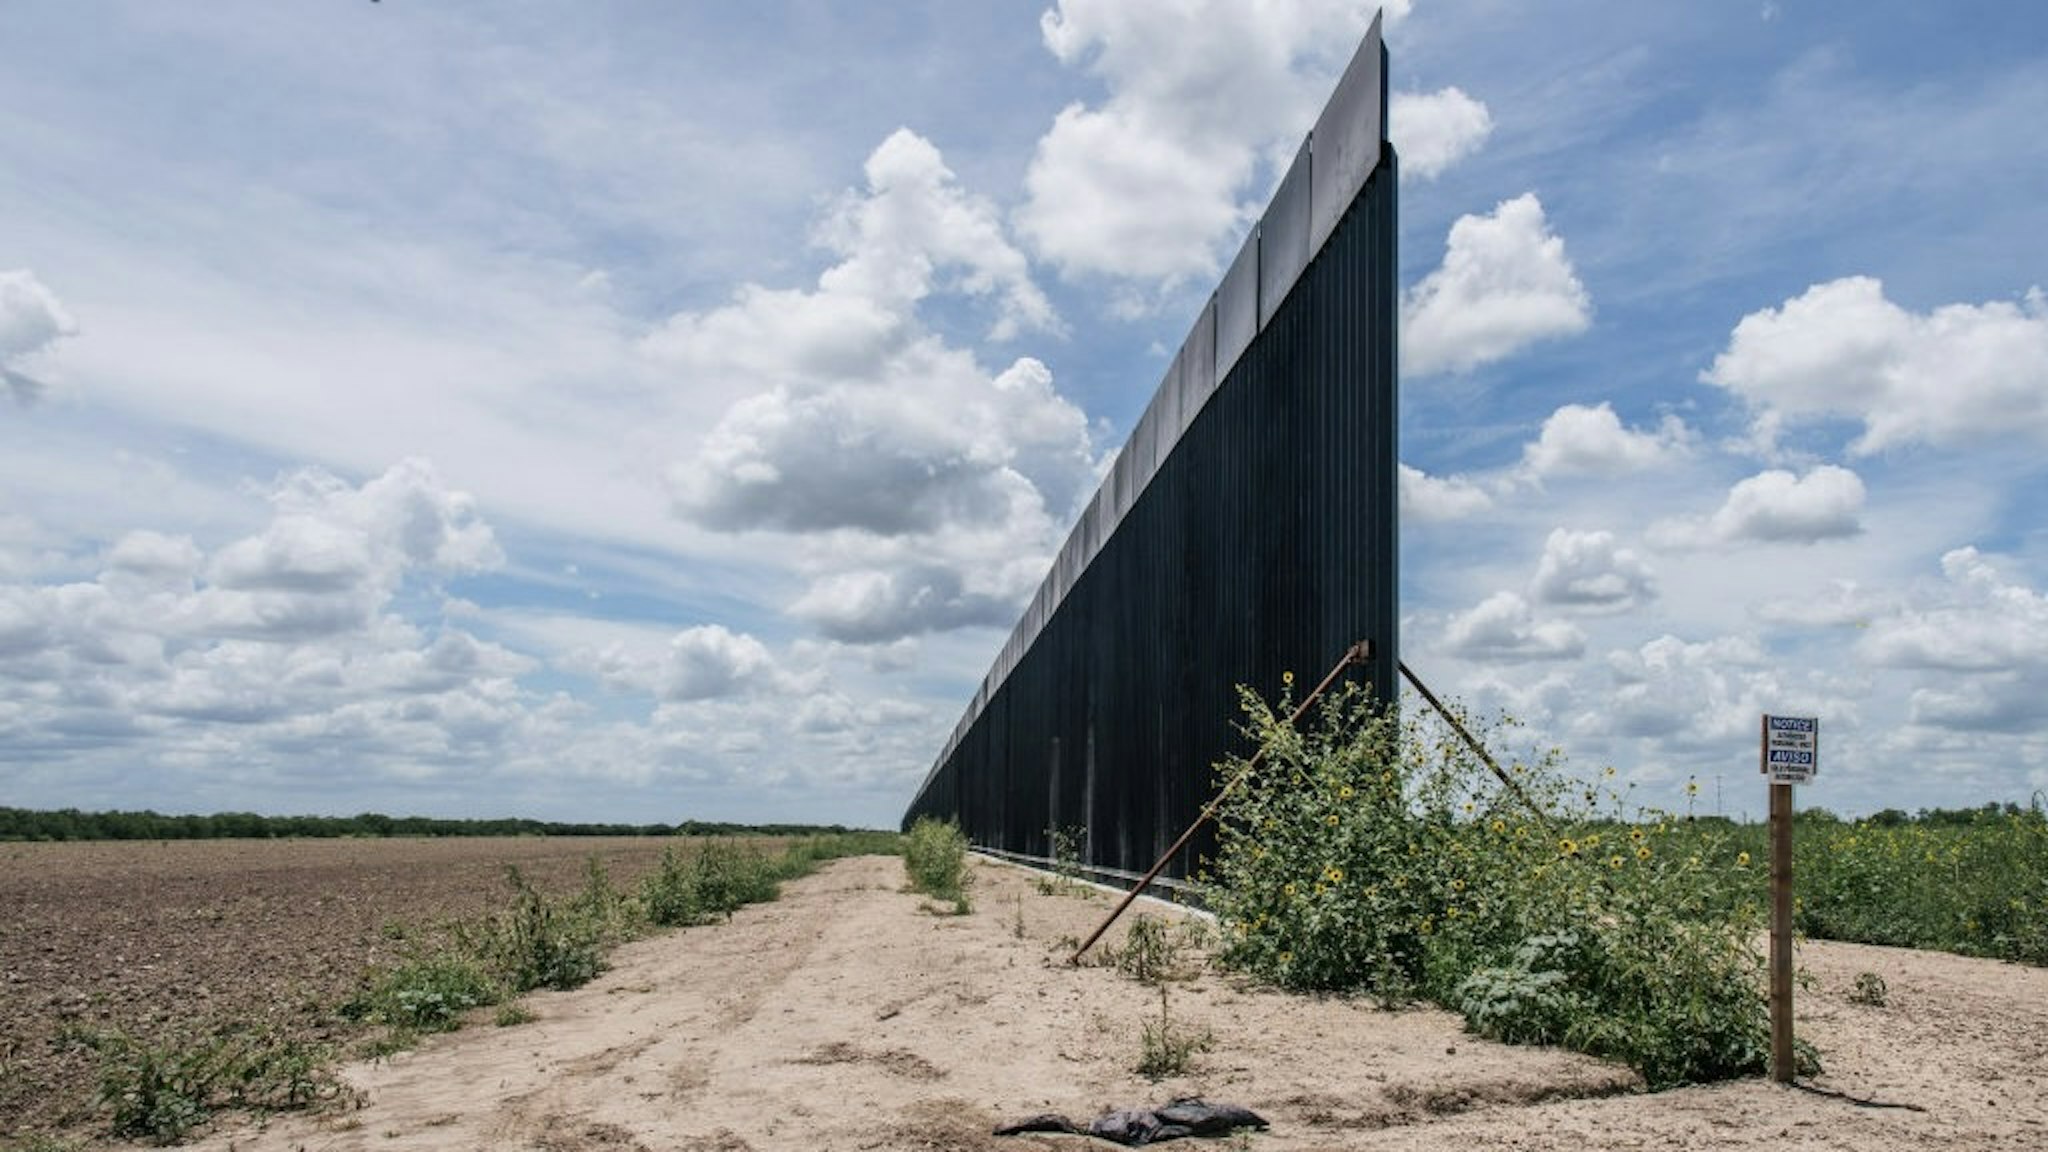 Migrants Continue To Cross Into Texas Despite Heat And Patrols LA JOYA, TEXAS - JULY 01: An unfinished section of border wall is seen on July 01, 2021 in La Joya, Texas. Recently, Texas Gov. Greg Abbott has pledged to build a state-funded border wall as a surge of mostly Central American immigrants crossing into the United States continues to challenge U.S. immigration agencies. So far in 2021, the border patrol has apprehended more than 900,000 immigrants crossing into the U.S. from Mexico. (Photo by Brandon Bell/Getty Images) Brandon Bell / Staff